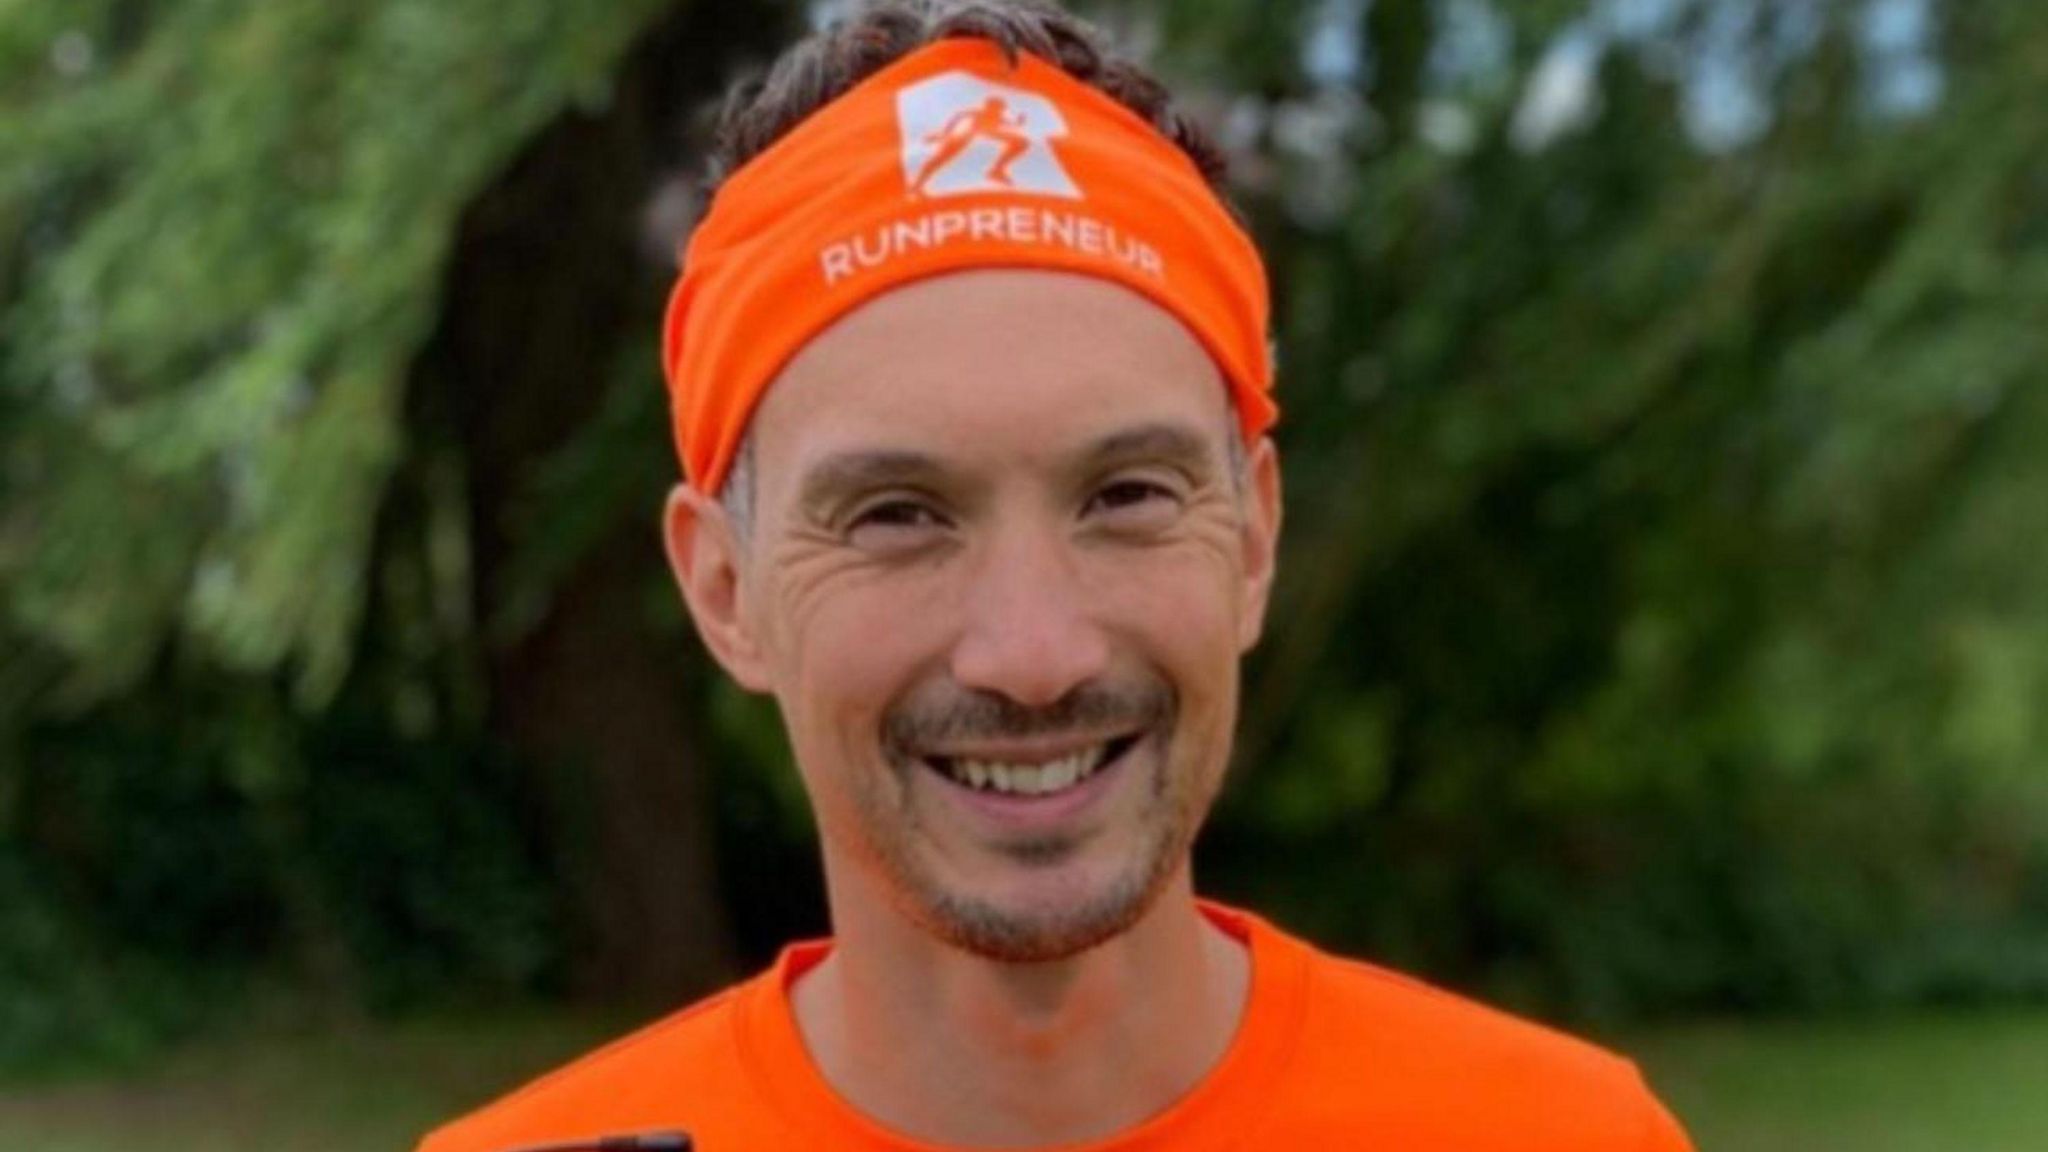 Kevin Brittain with small brown beard wearing an orange top and headband